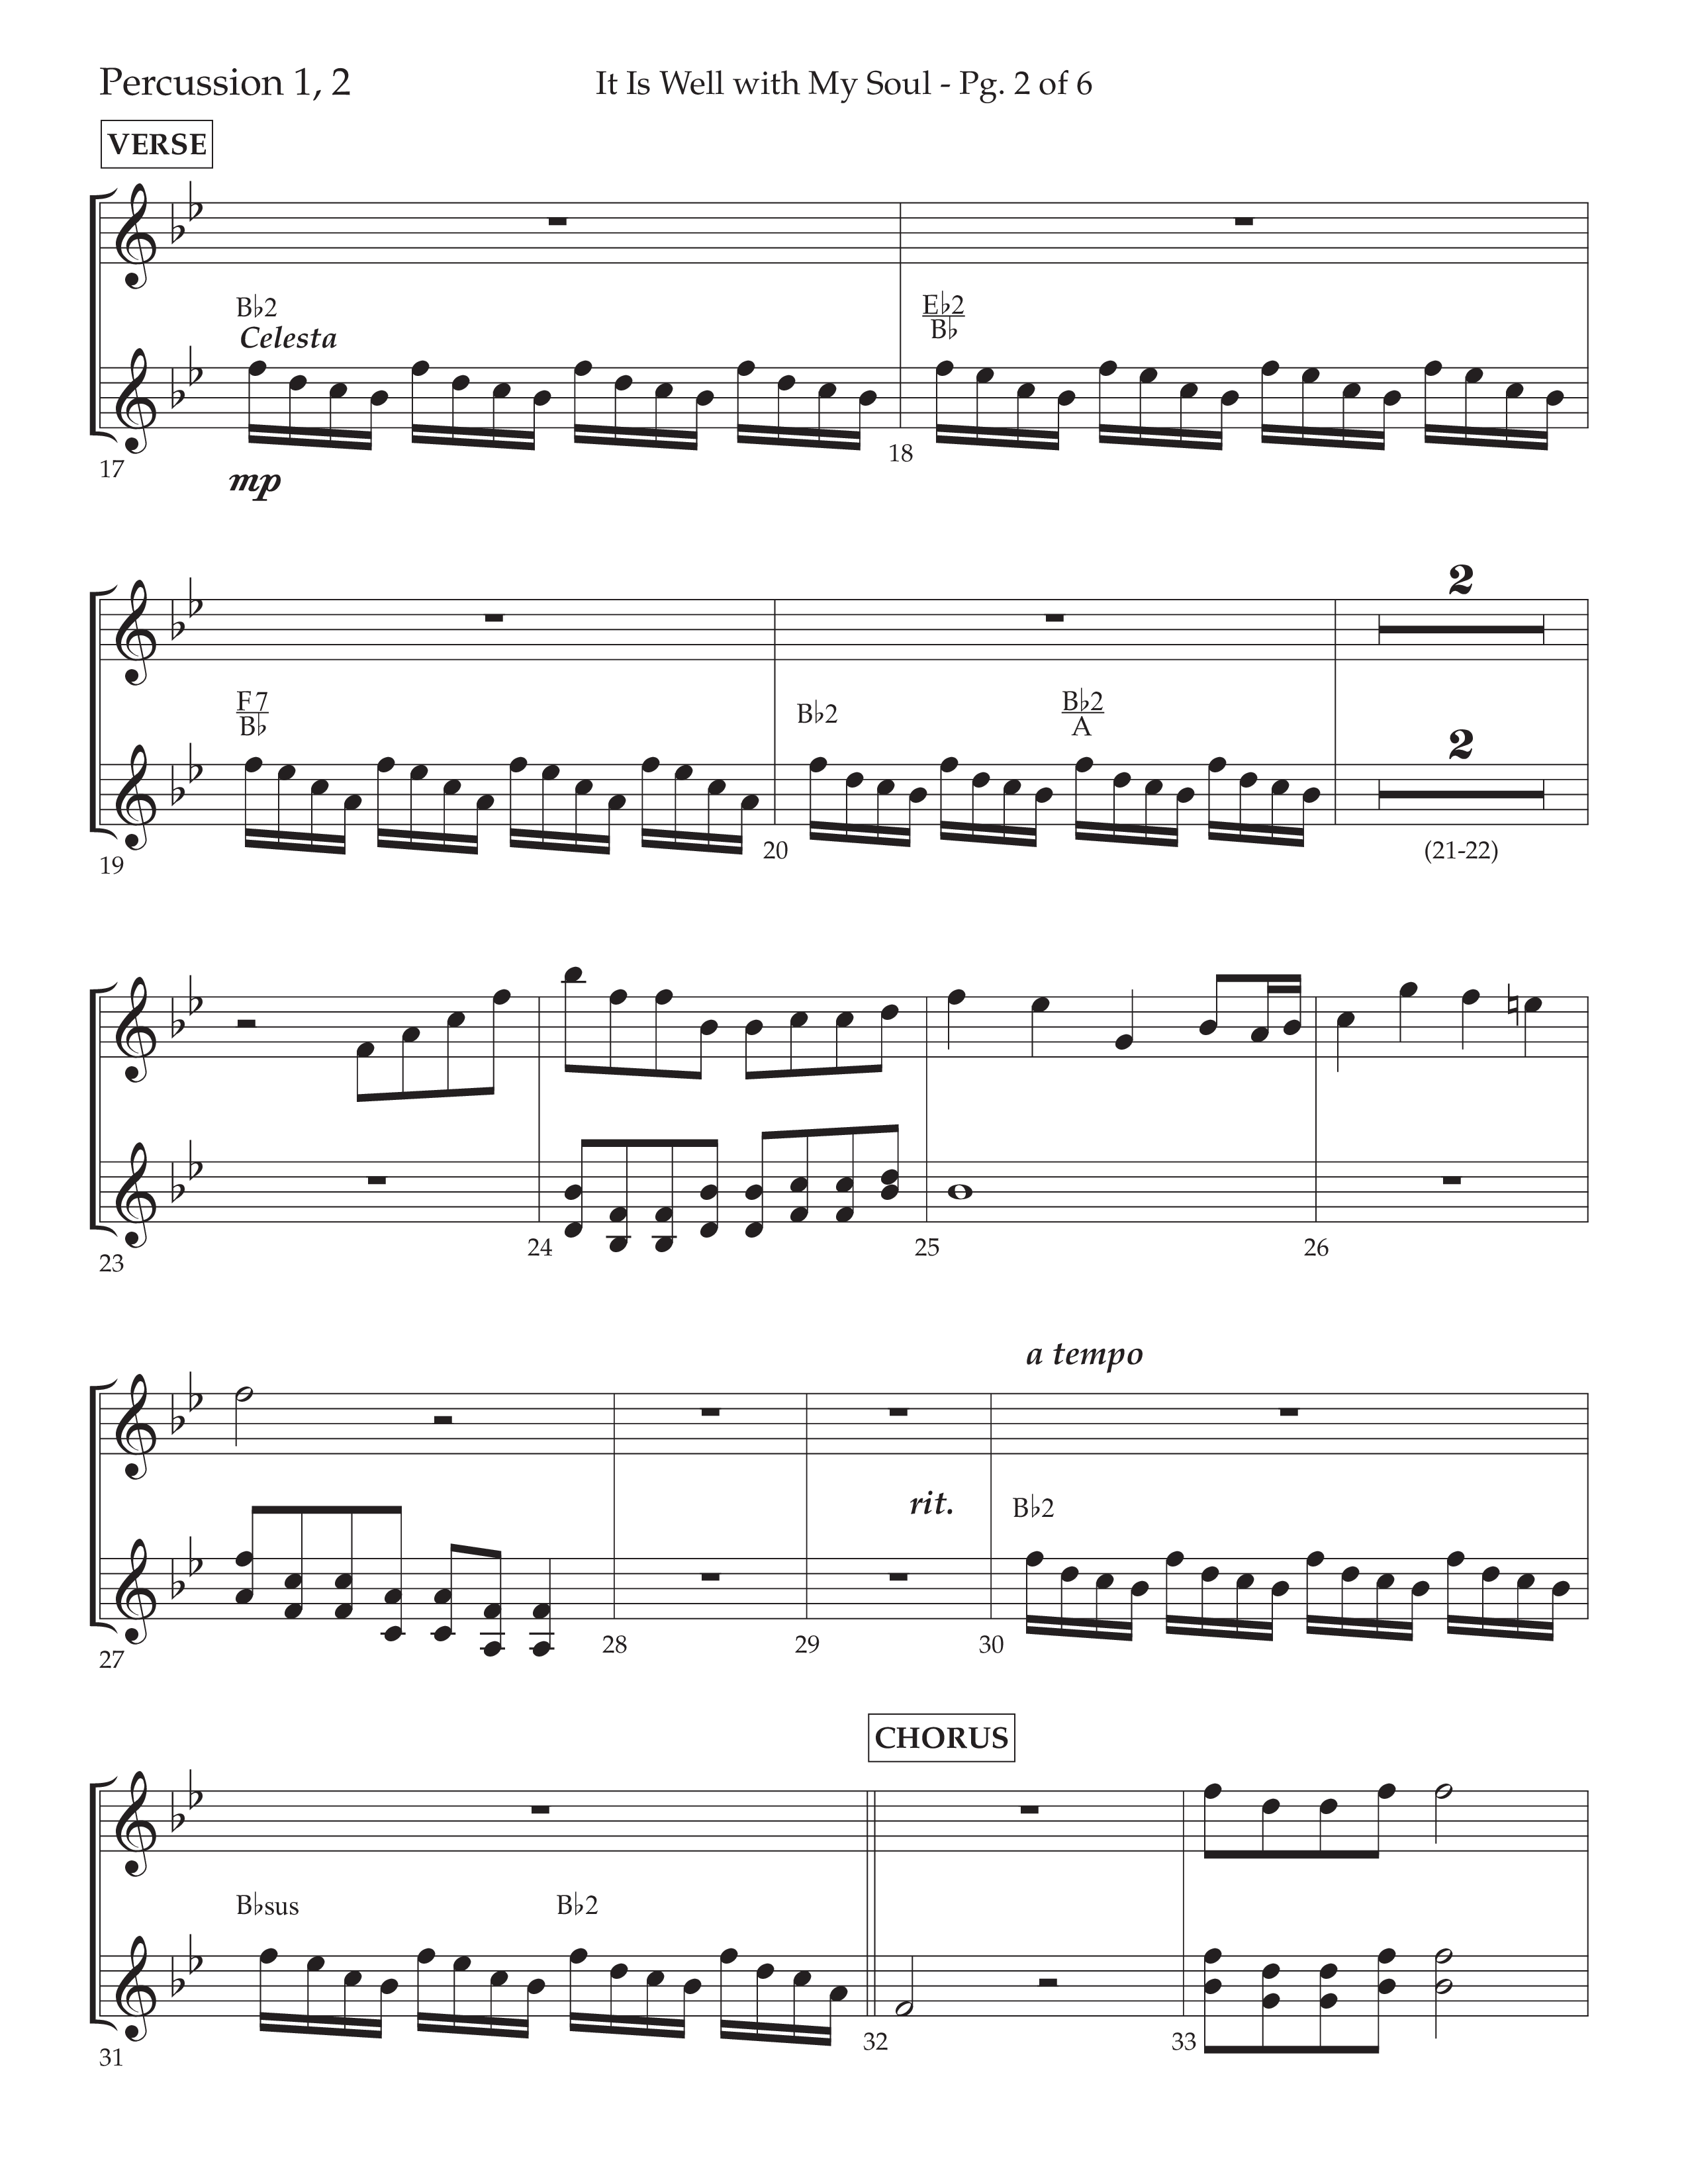 It Is Well With My Soul (Choral Anthem SATB) Percussion 1/2 (Lifeway Choral / Arr. John Bolin / Orch. David Clydesdale)